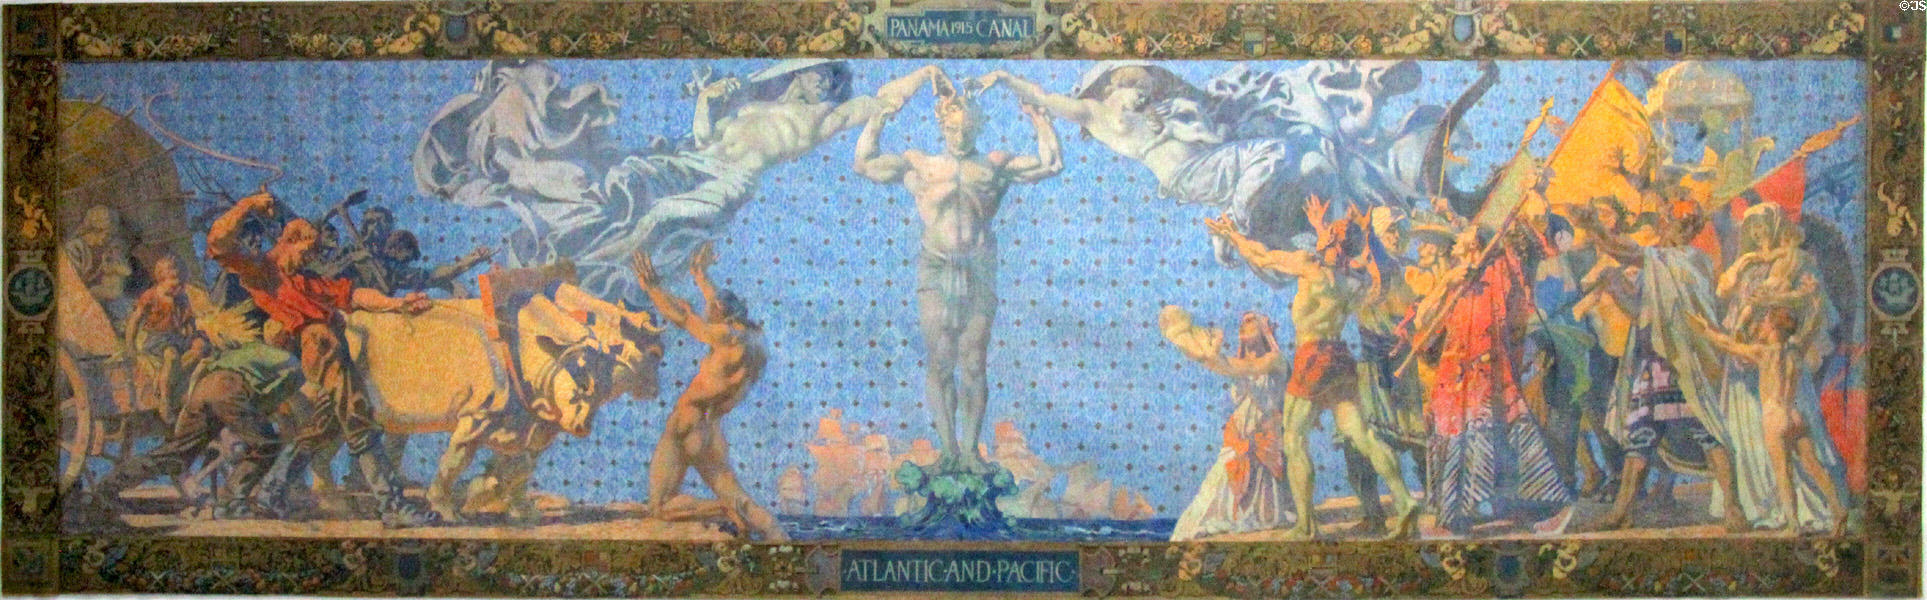 Atlantic & Pacific mural painted for 1915 Panama-Pacific Exposition (1914) by William de Leftwich Dodge at de Young Museum. San Francisco, CA.